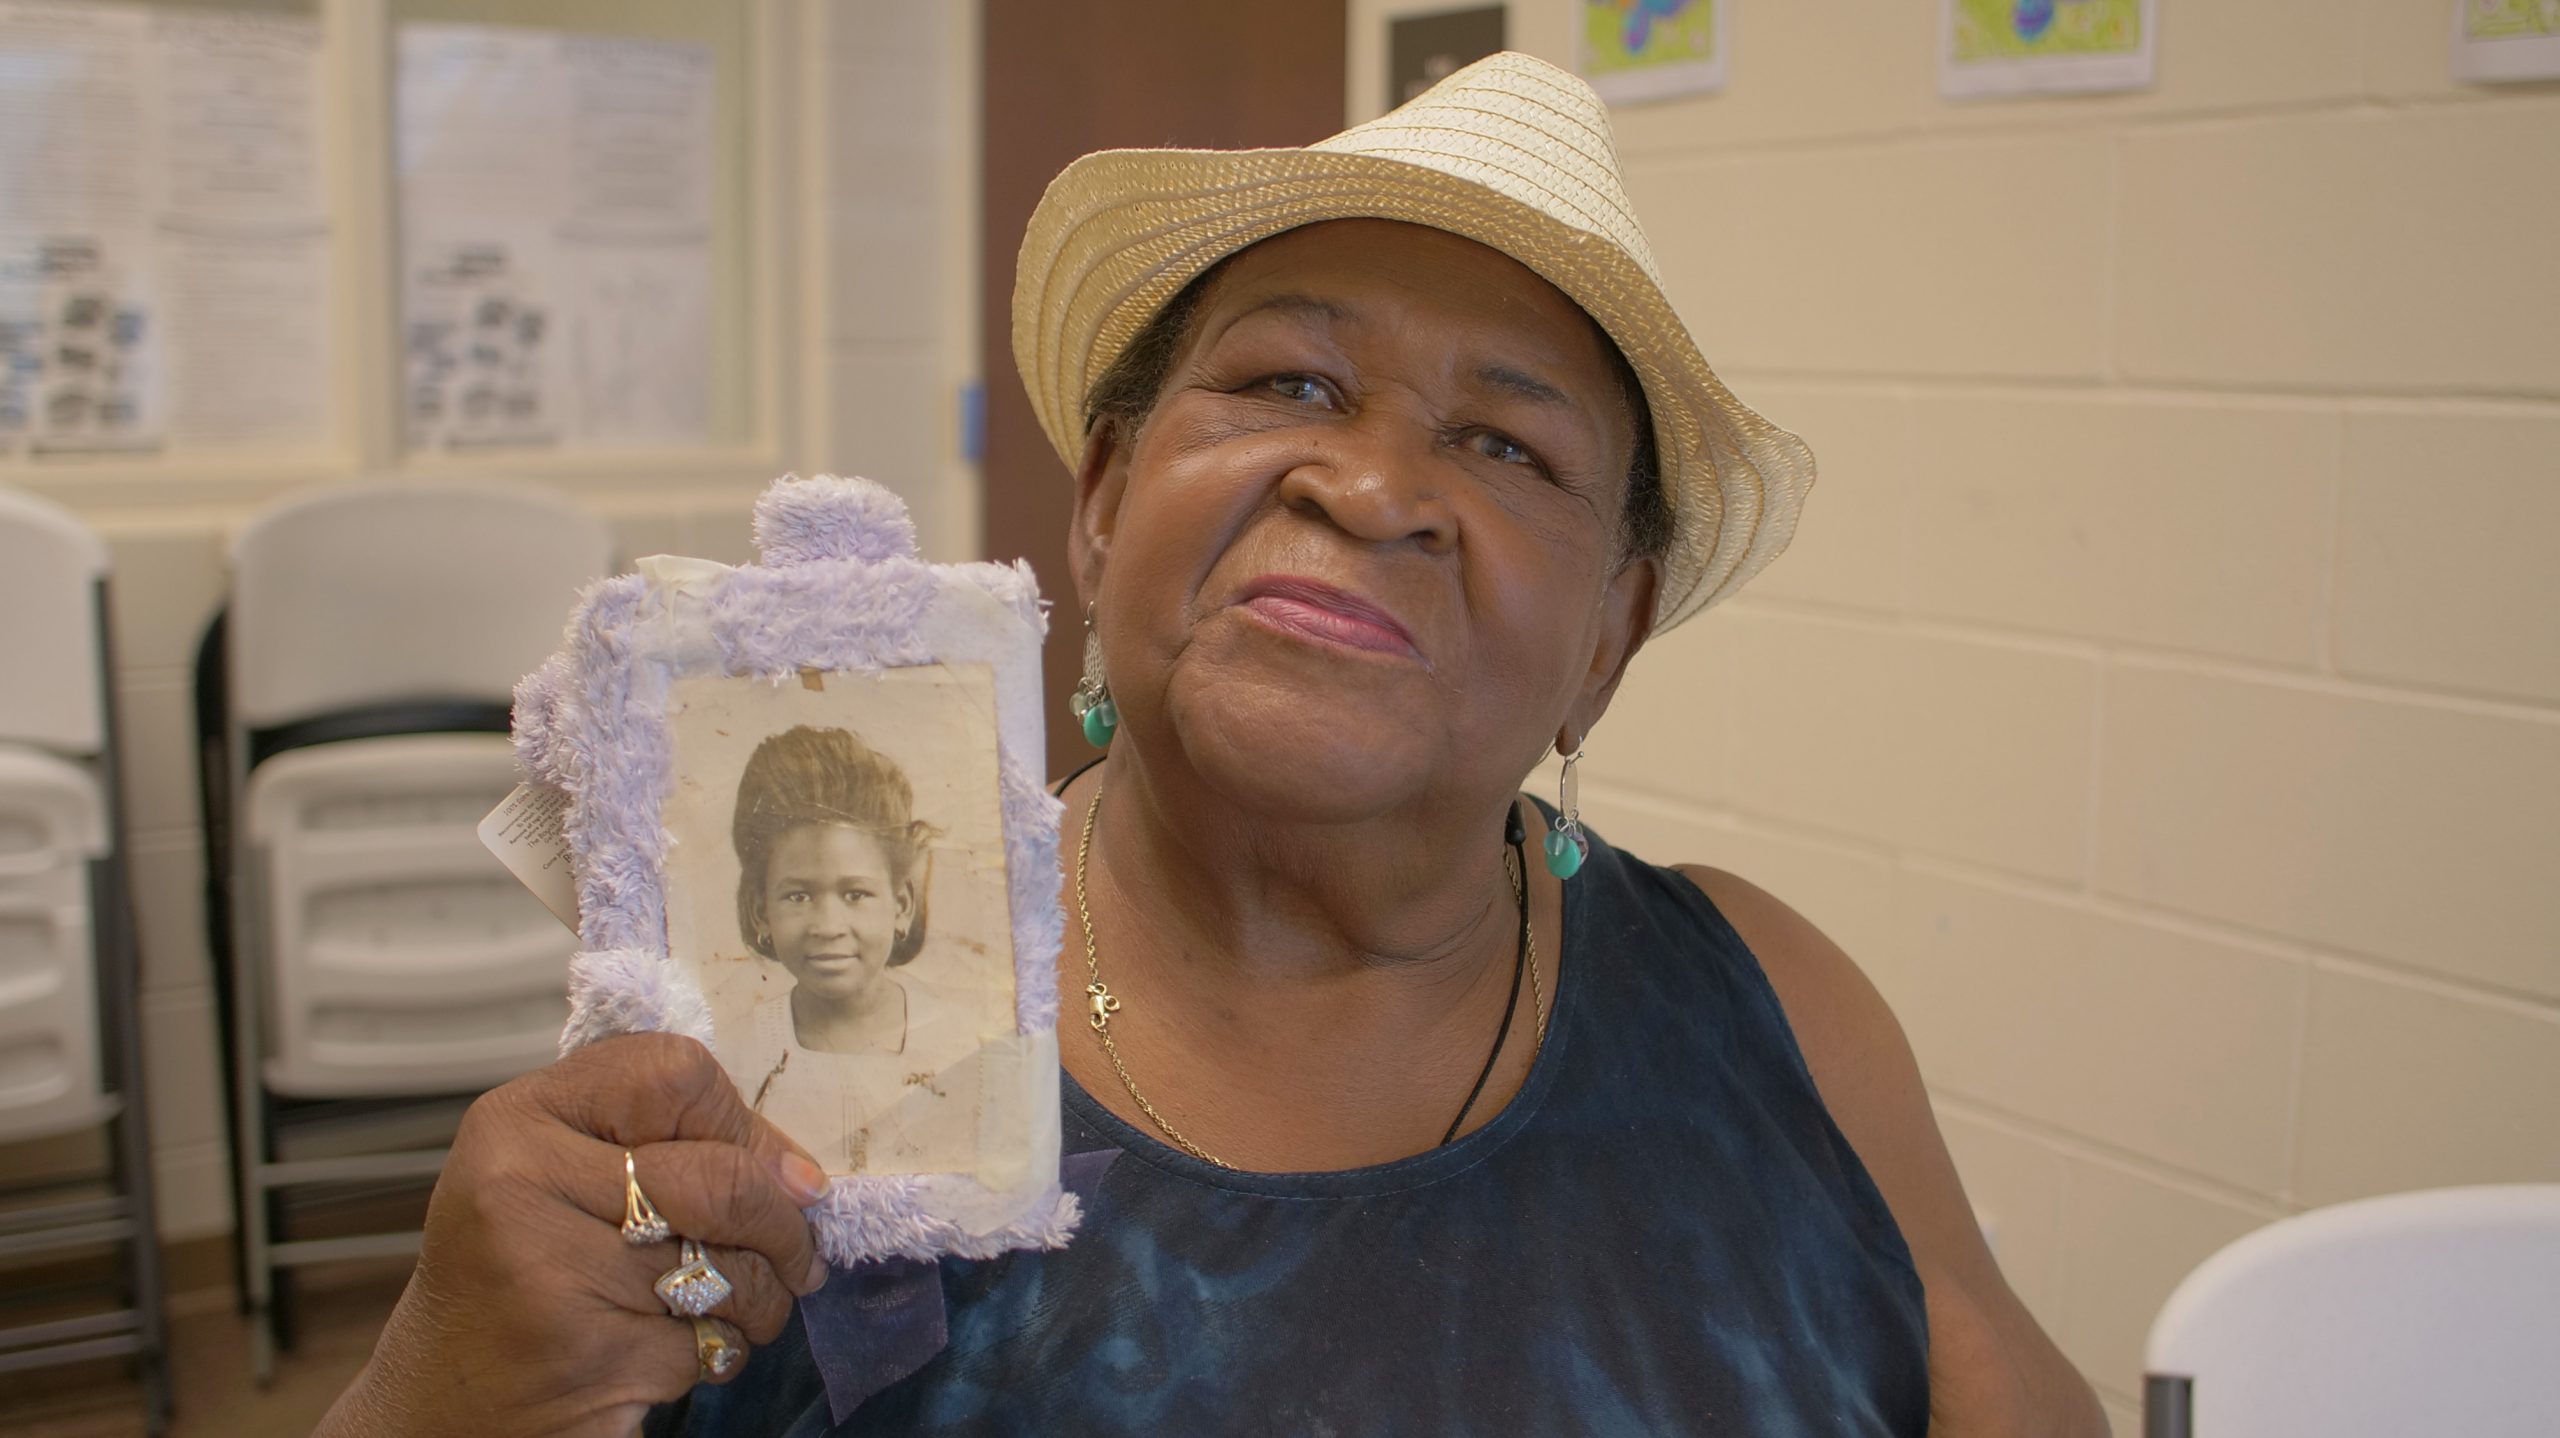 Marshall holds a framed photo of herself as a child. She is sitting in a folding chair and looking at the camera.